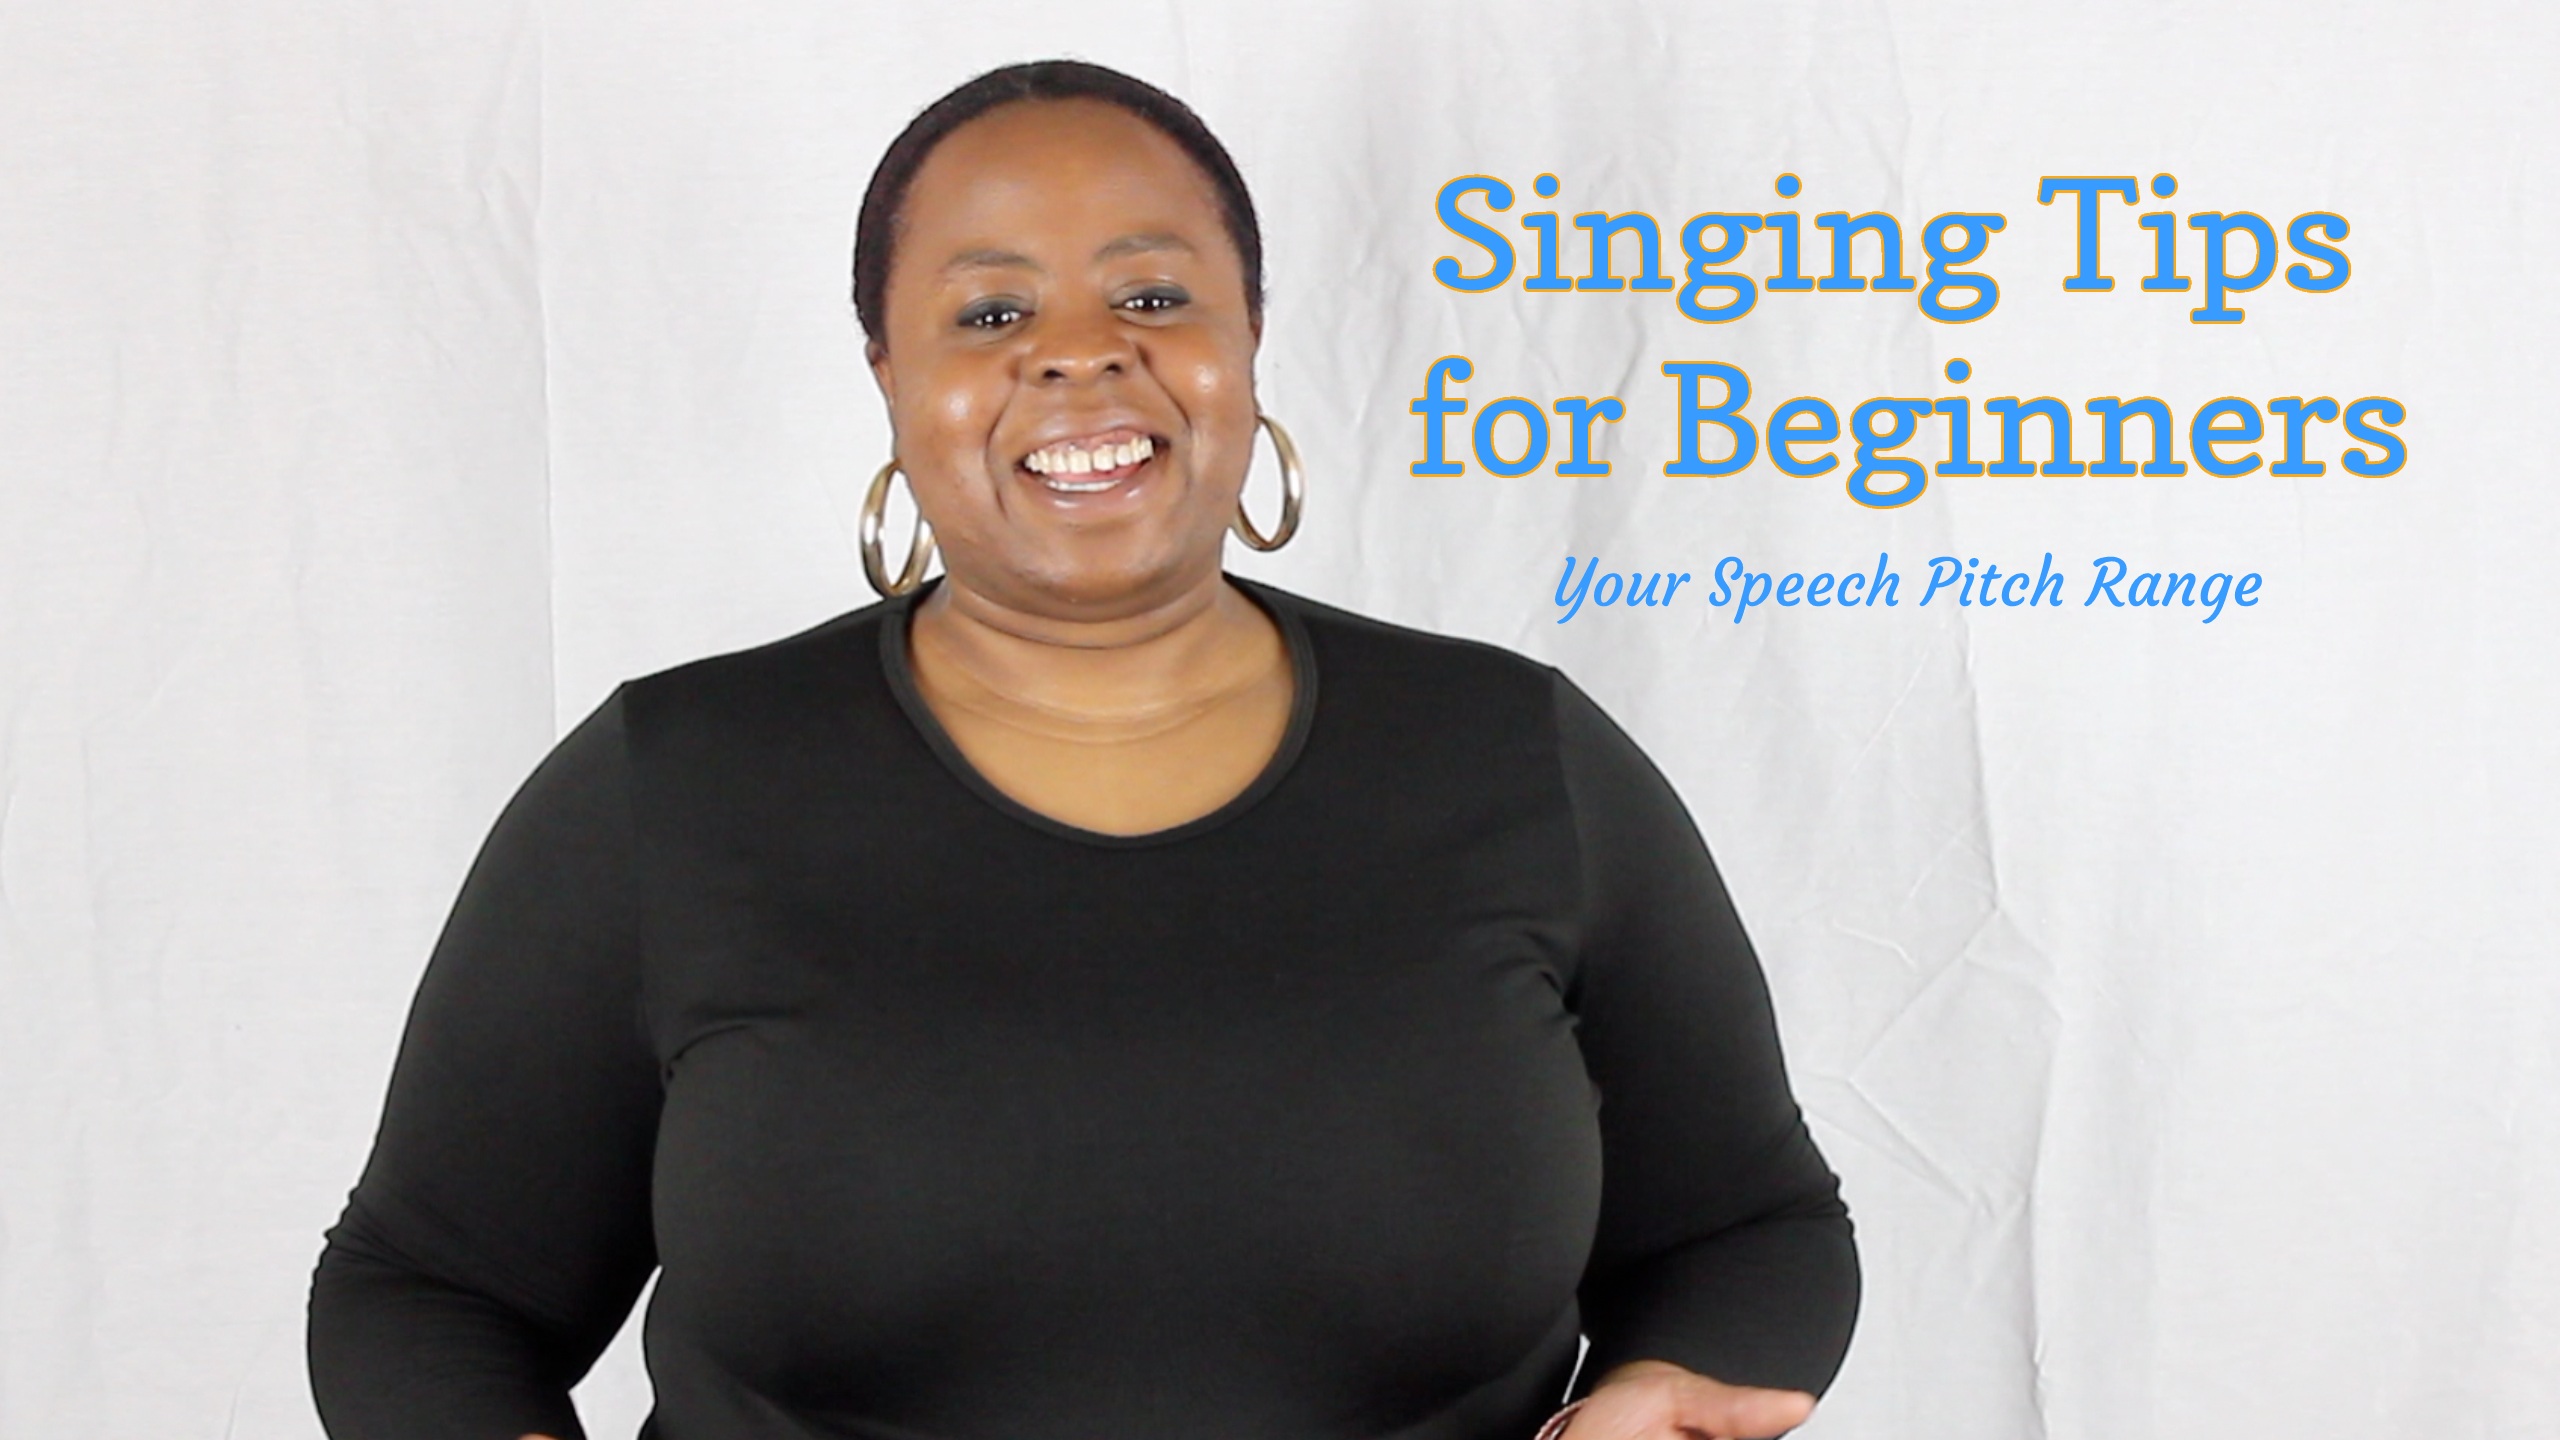 Image of singing teacher Myrtle offering singing tips for beginners and finding your speech pitch range.